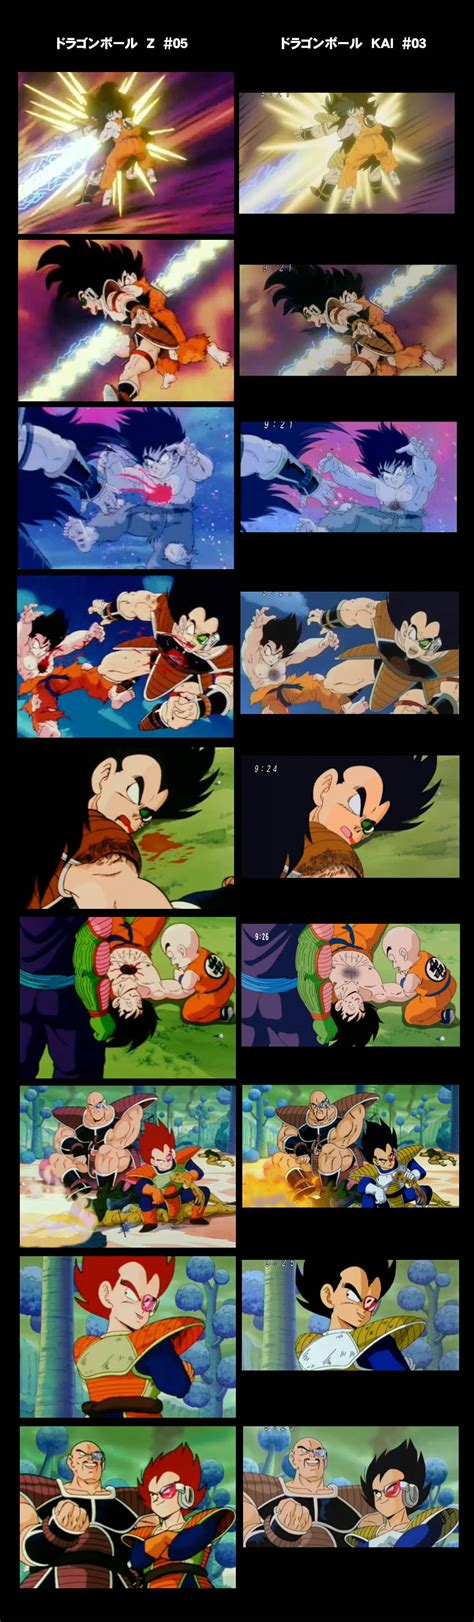 Being a slick, edited down kai is great for all that stuff. BBY/AMZ Dragon Ball Z Seasons 1, 2, 3 (Blu ray) - $17.99/ea - Blu-ray & DVD Deals - Cheap Ass Gamer